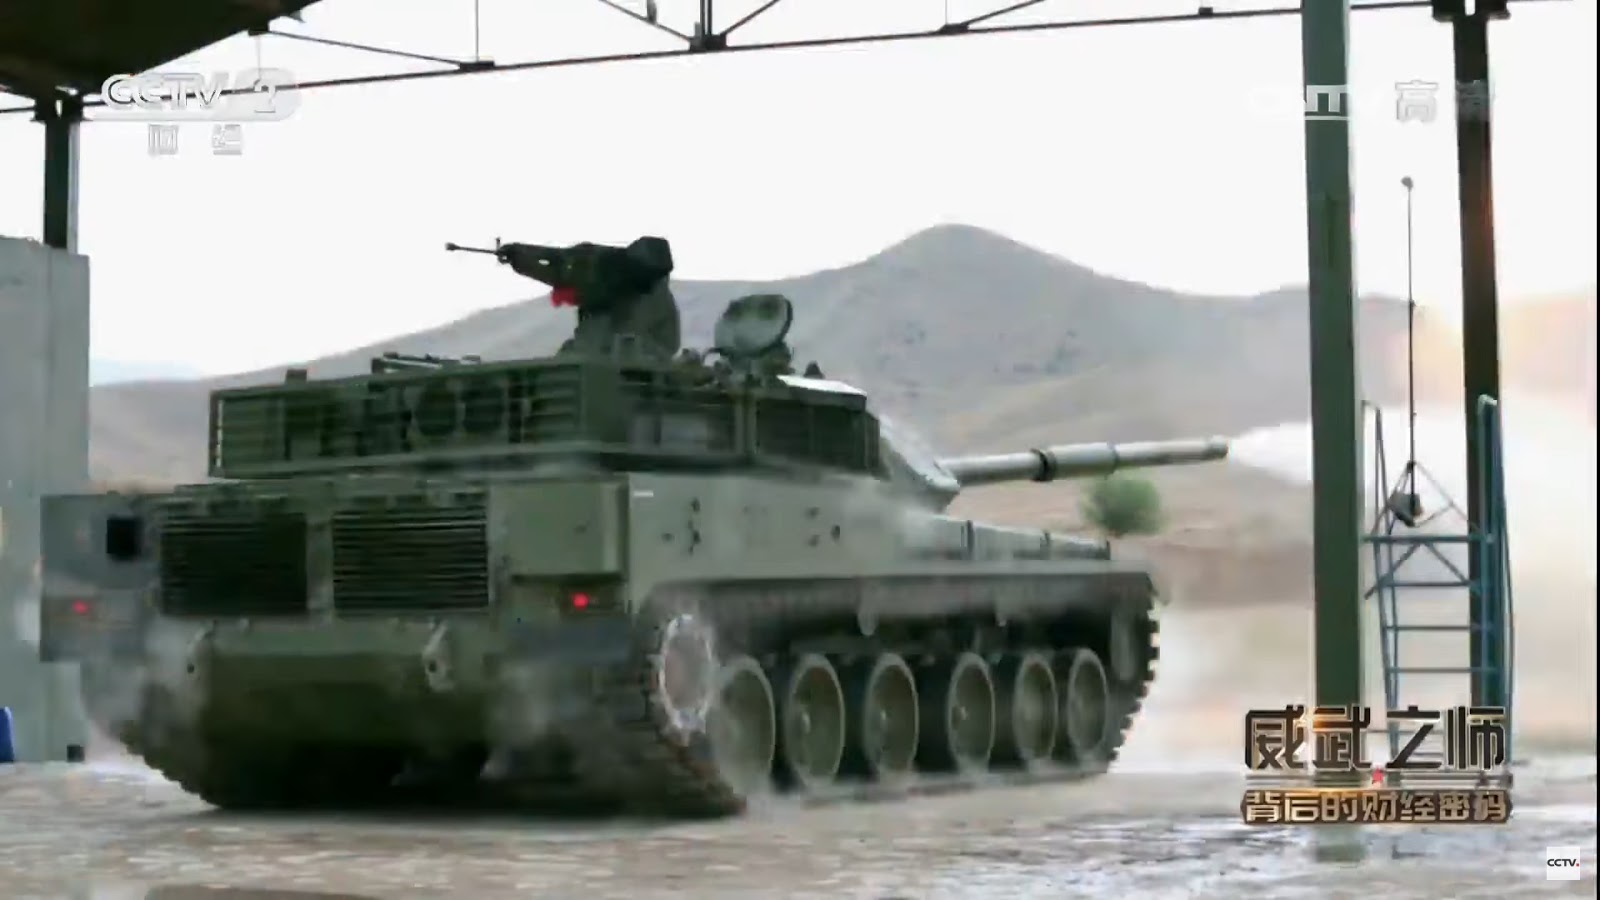 Military Technology: of VT-4 (MBT-3000) for the Royal Thai Army